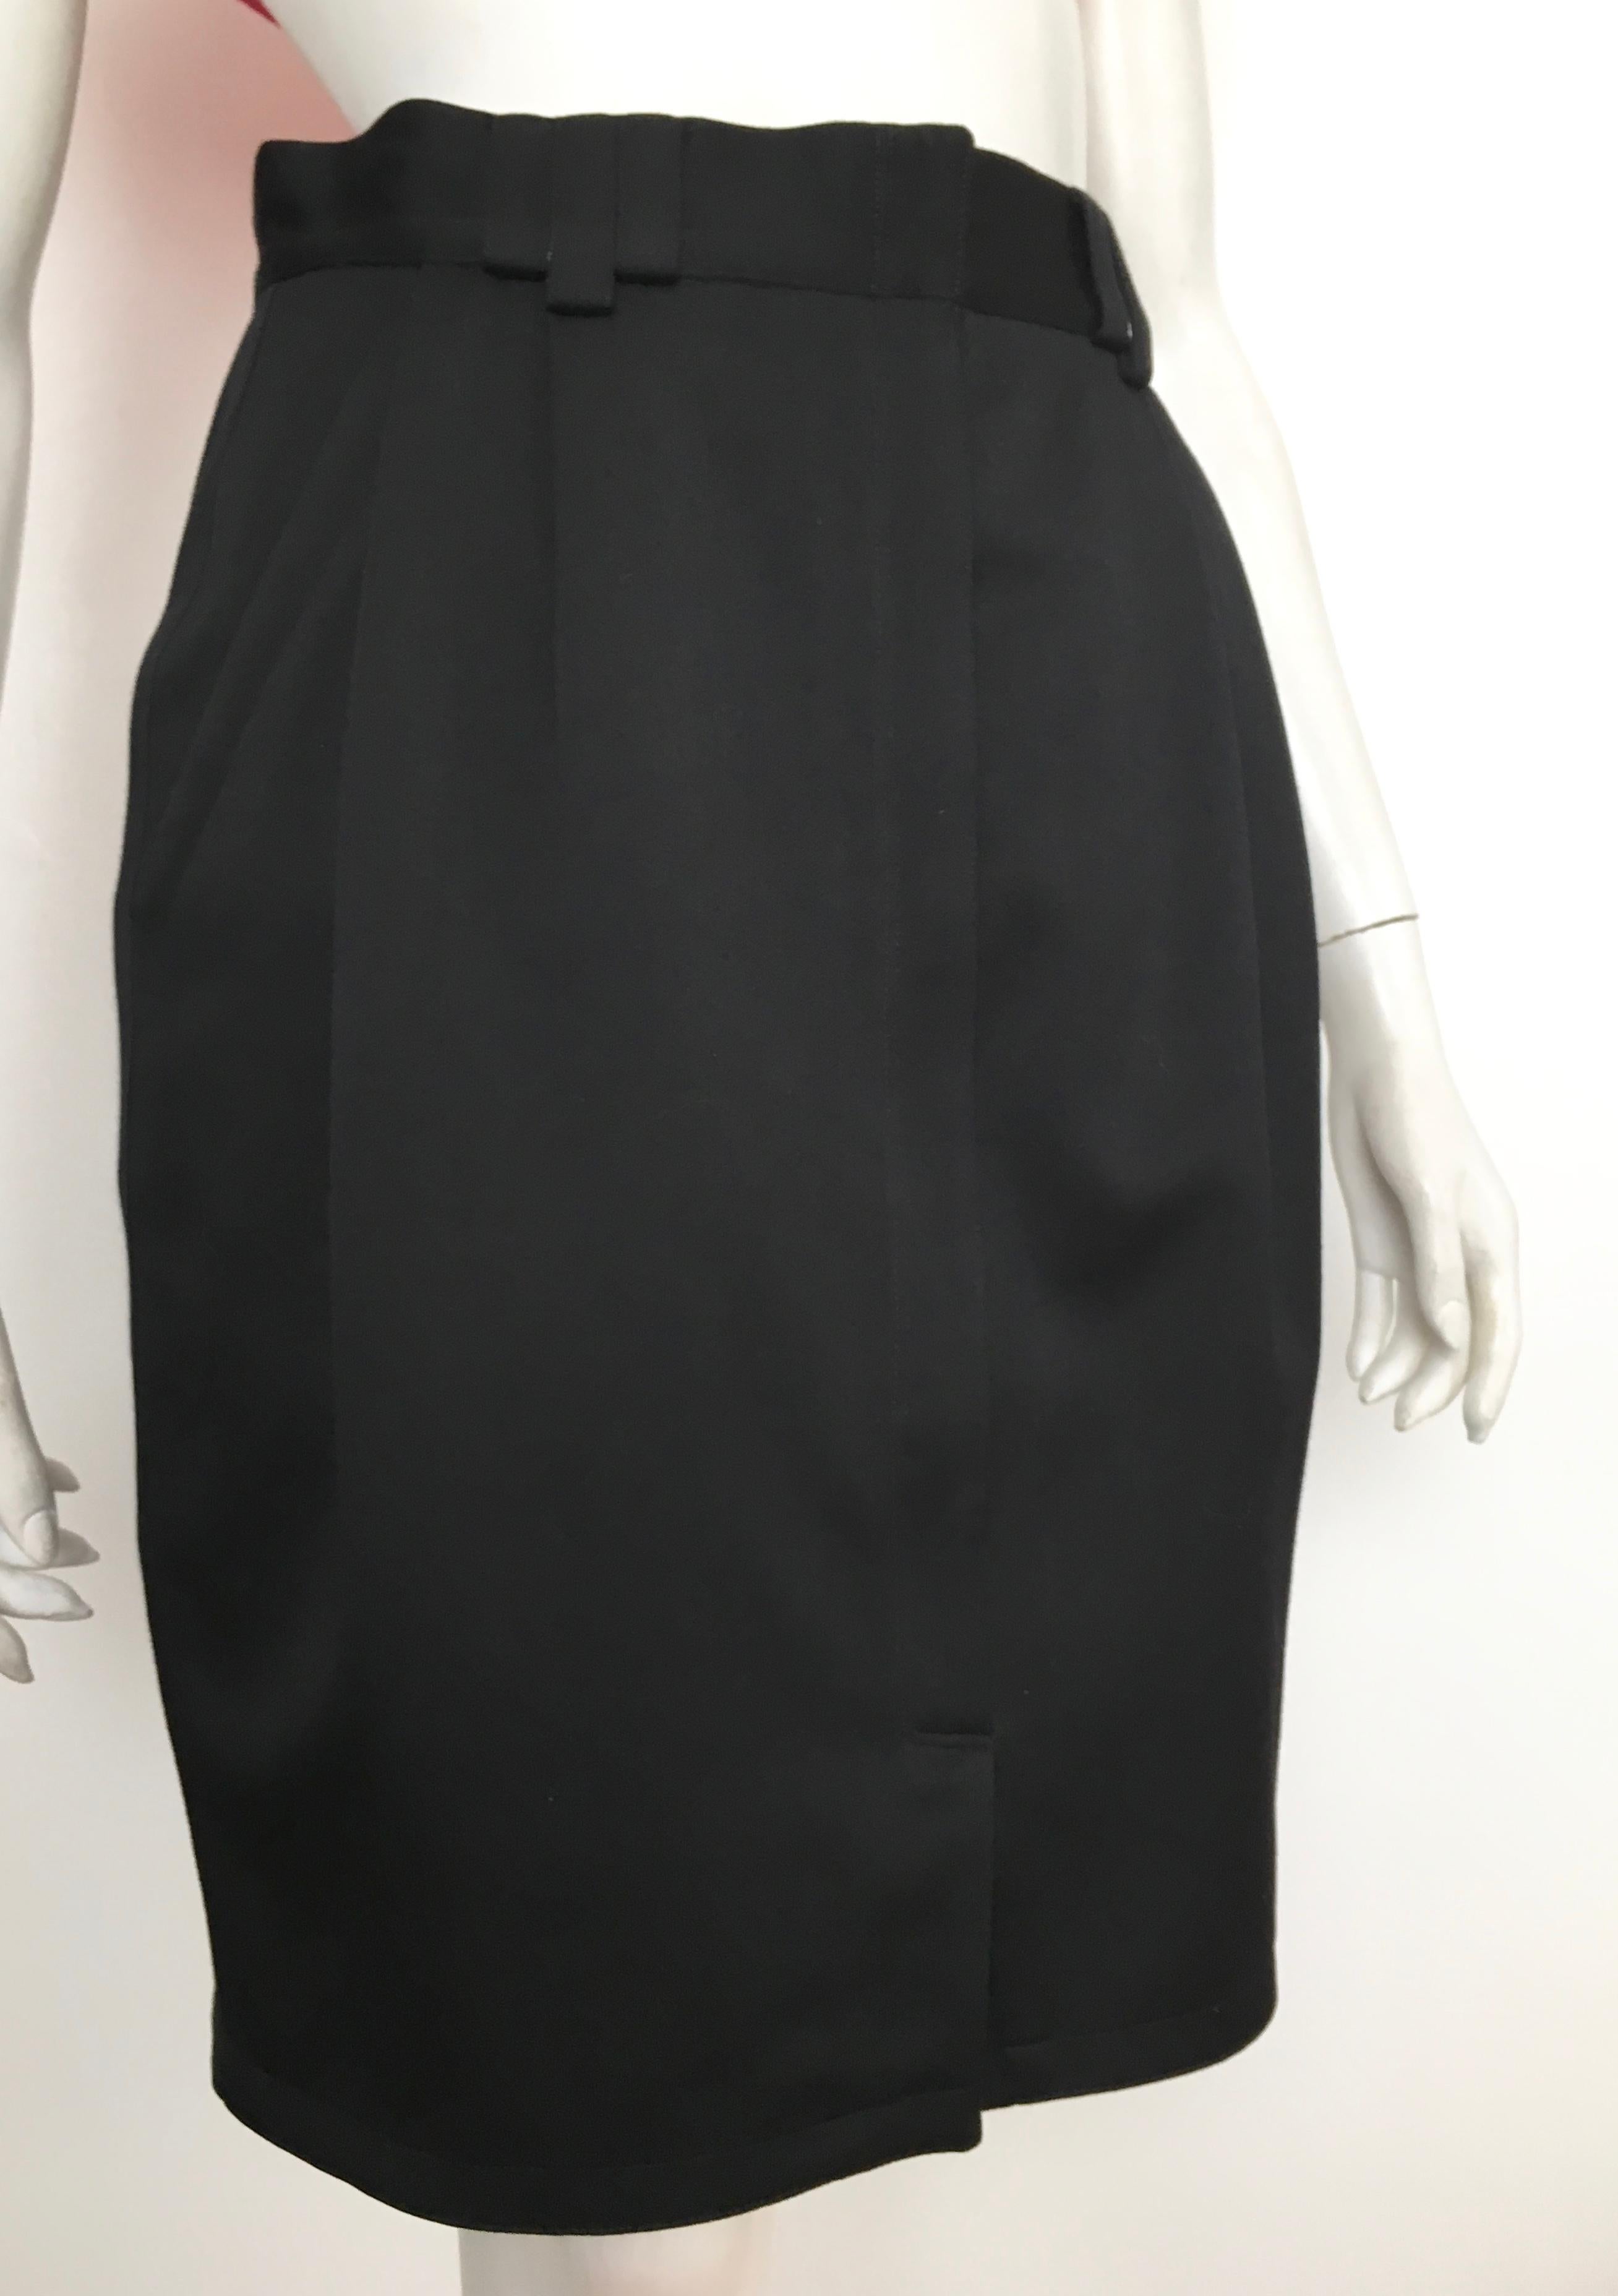 Gianni Versace 1980s black wool skirt with pockets is an Italian size 42 and fits like a size 4. The waist on this skirt is 28